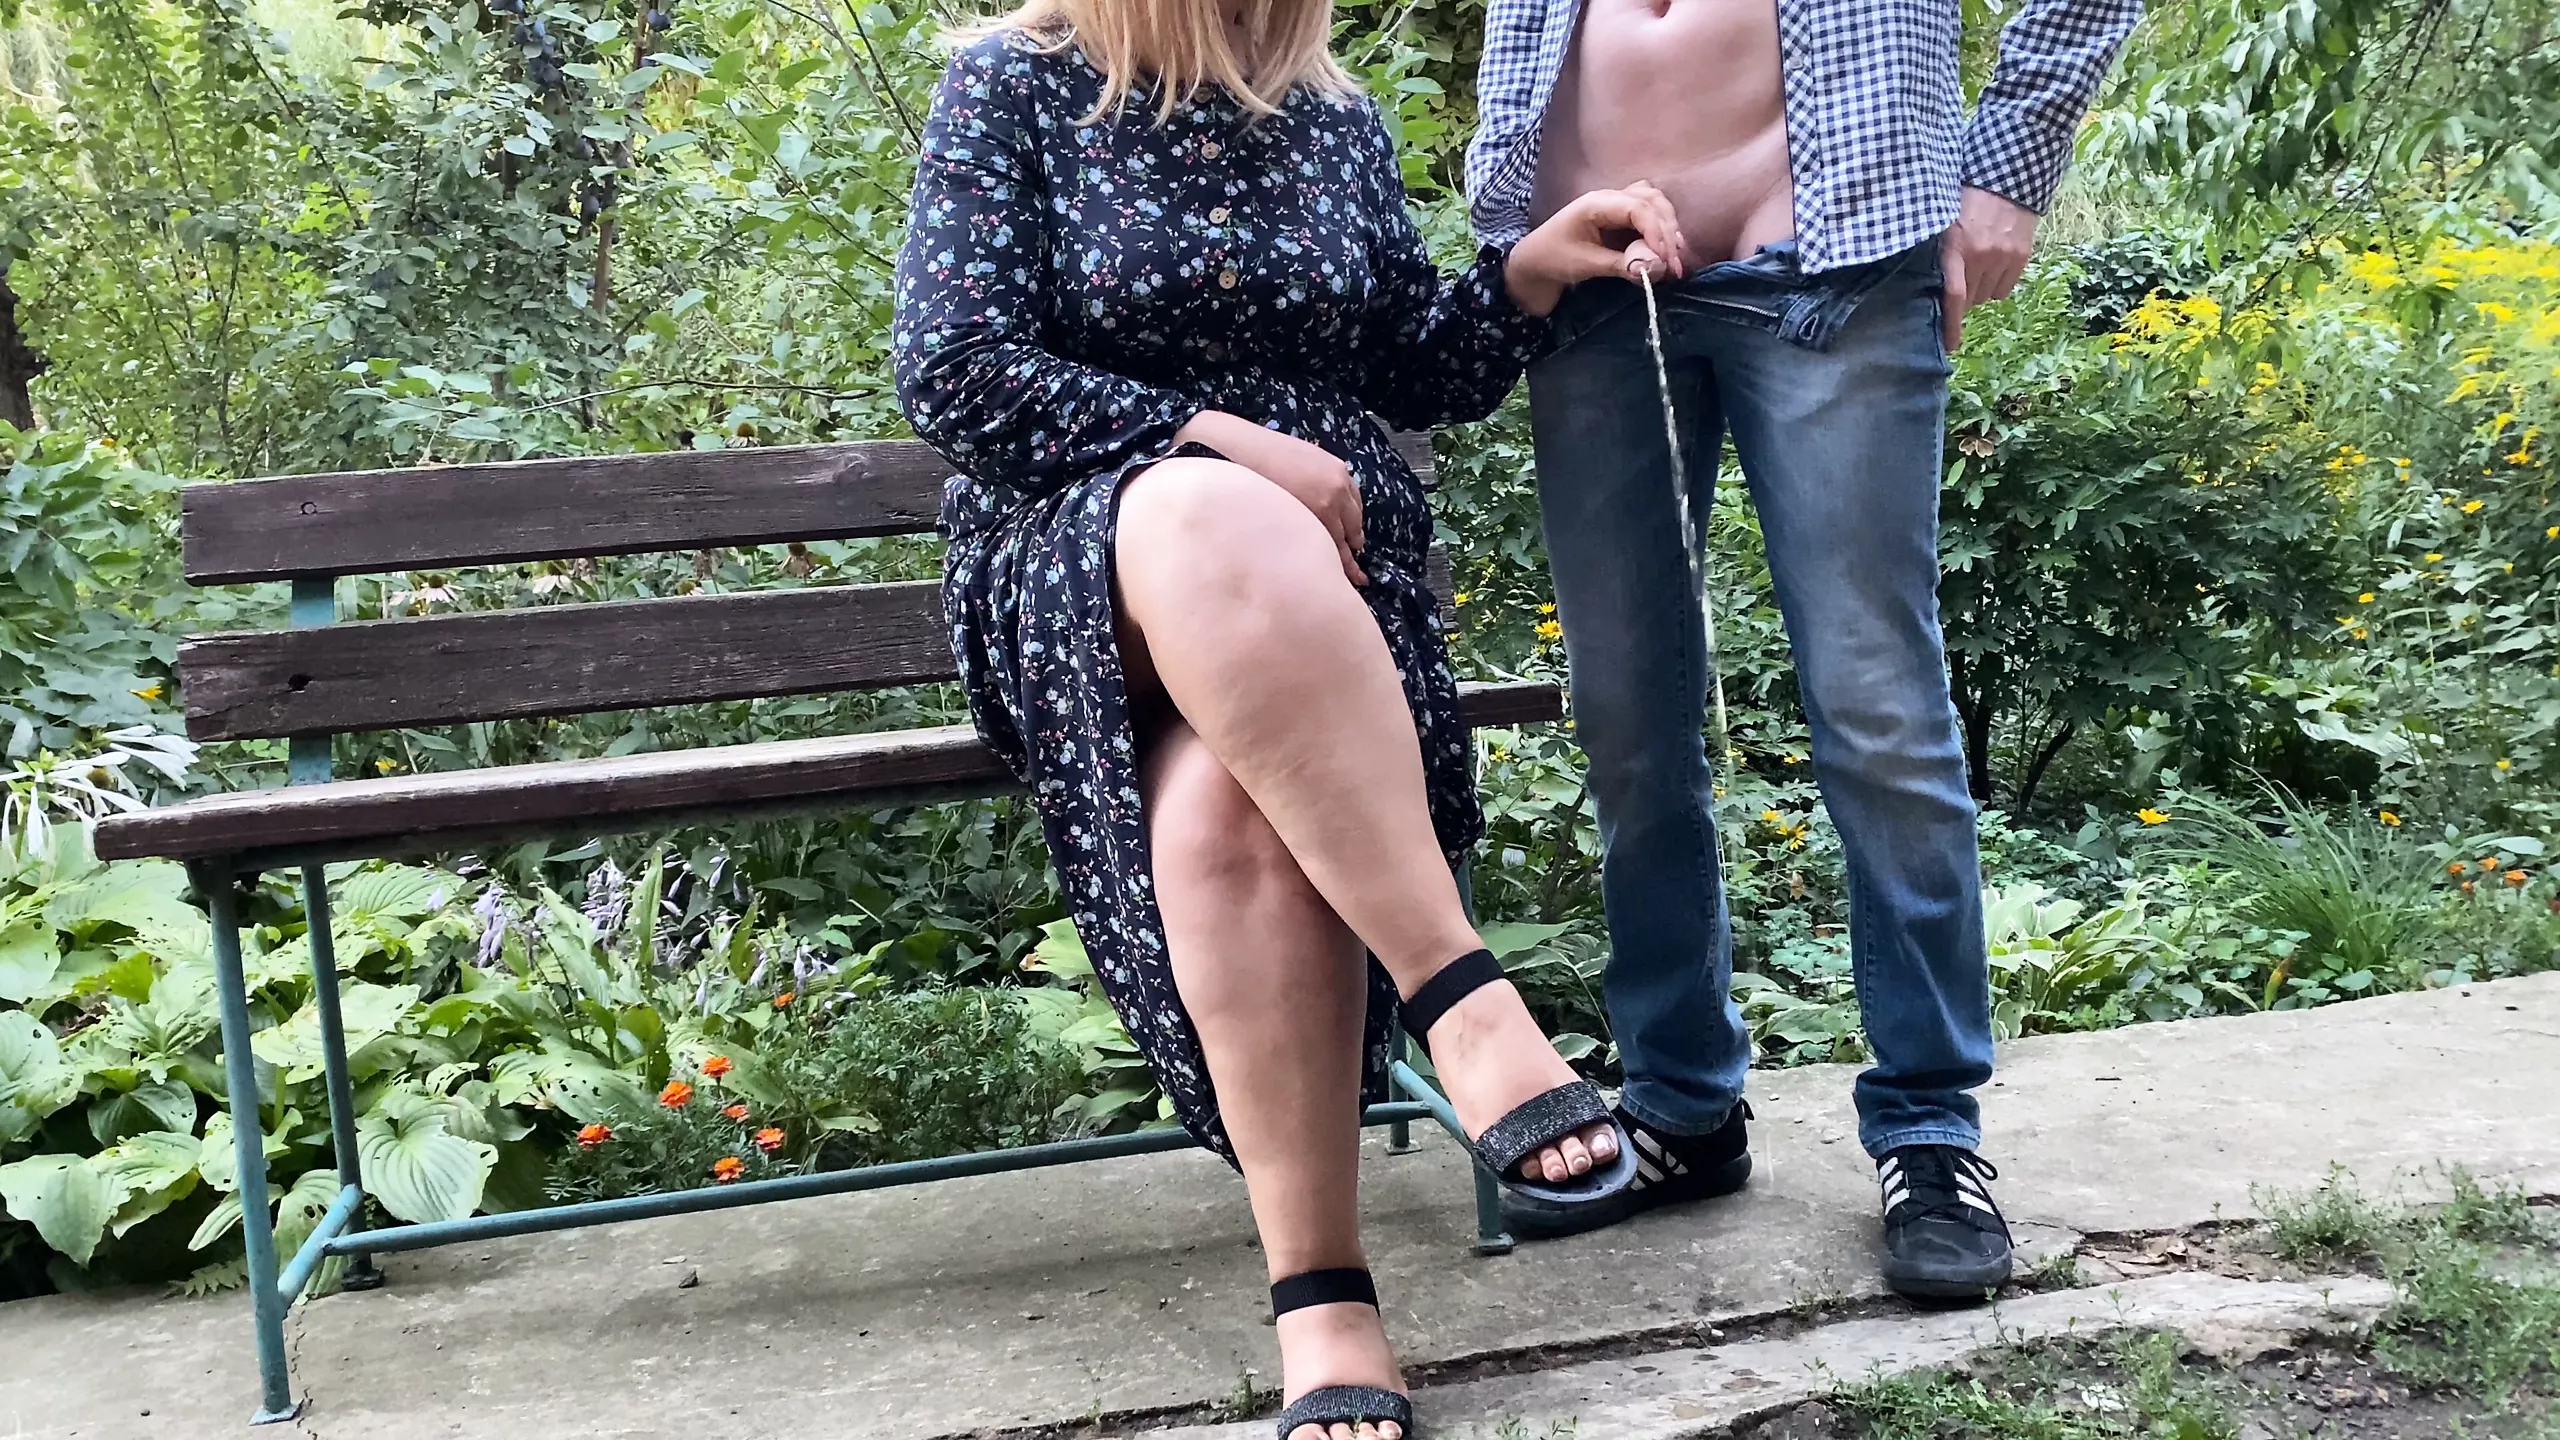 SHE holds his cock while HE pee in the park photo